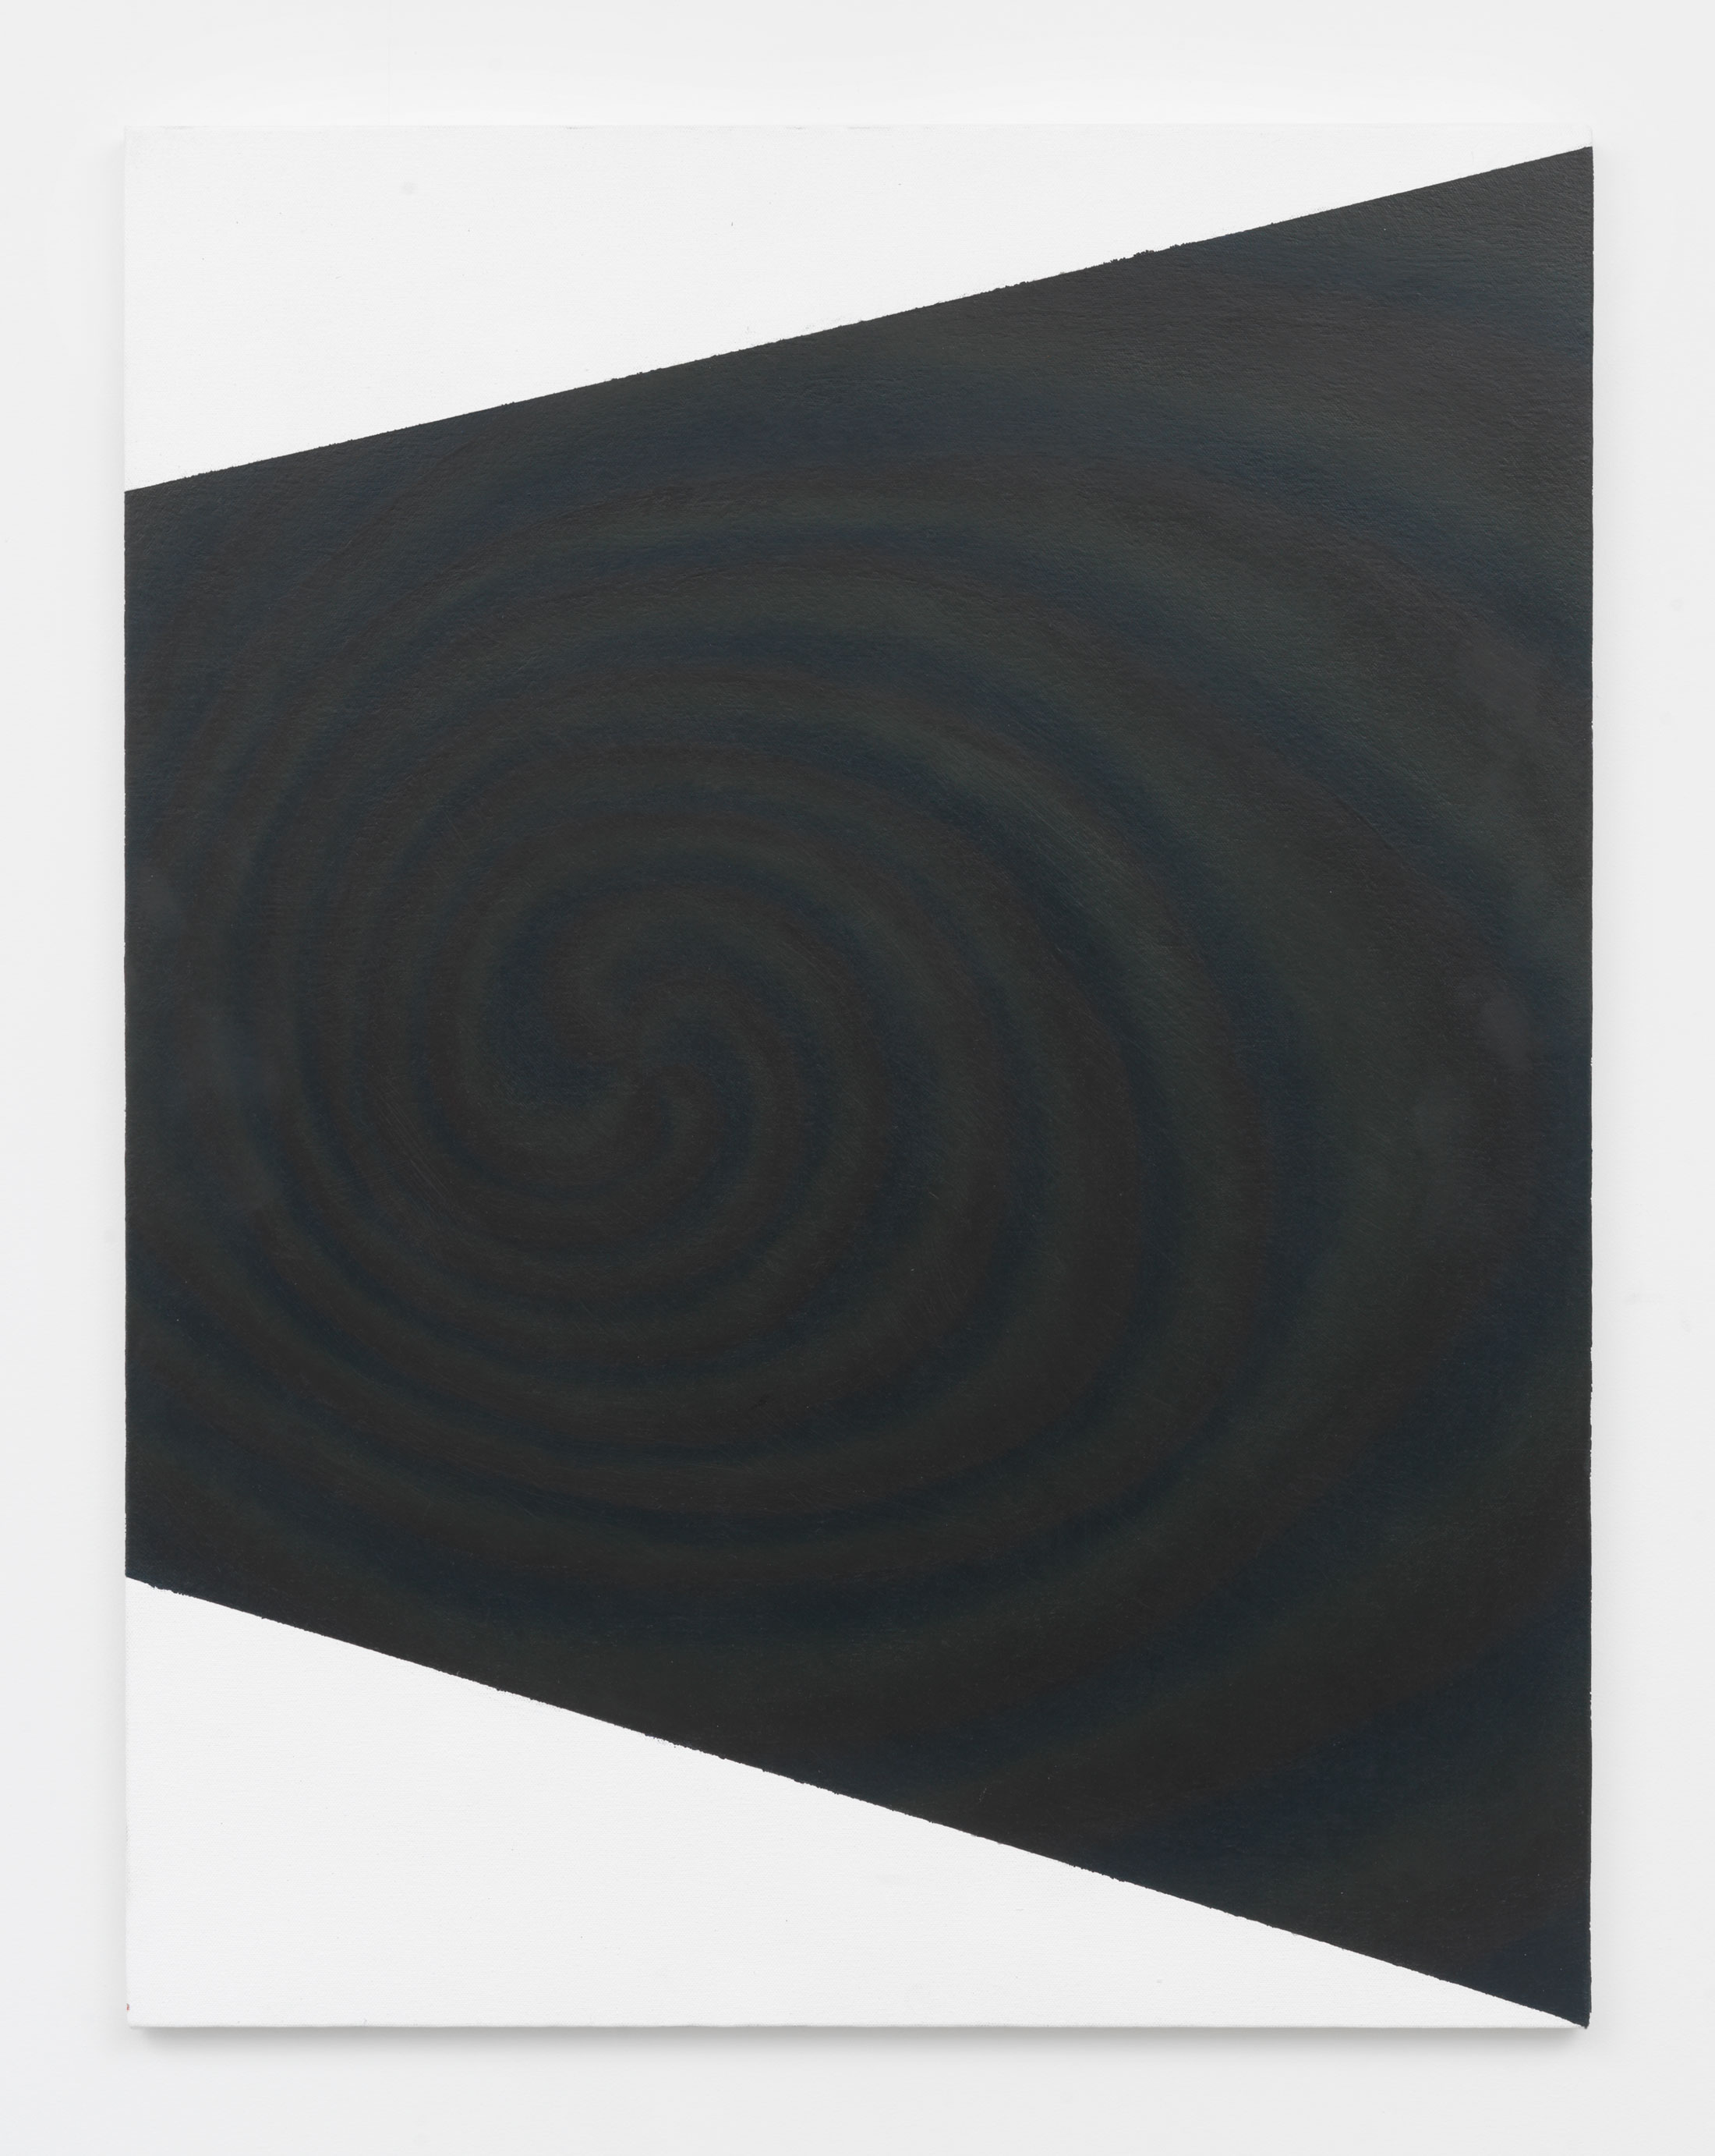 Alex Kwartler, Antisemantic (Anamorphic), 2016, flashe and acrylic on canvas, 30.5h x 23.5w in.